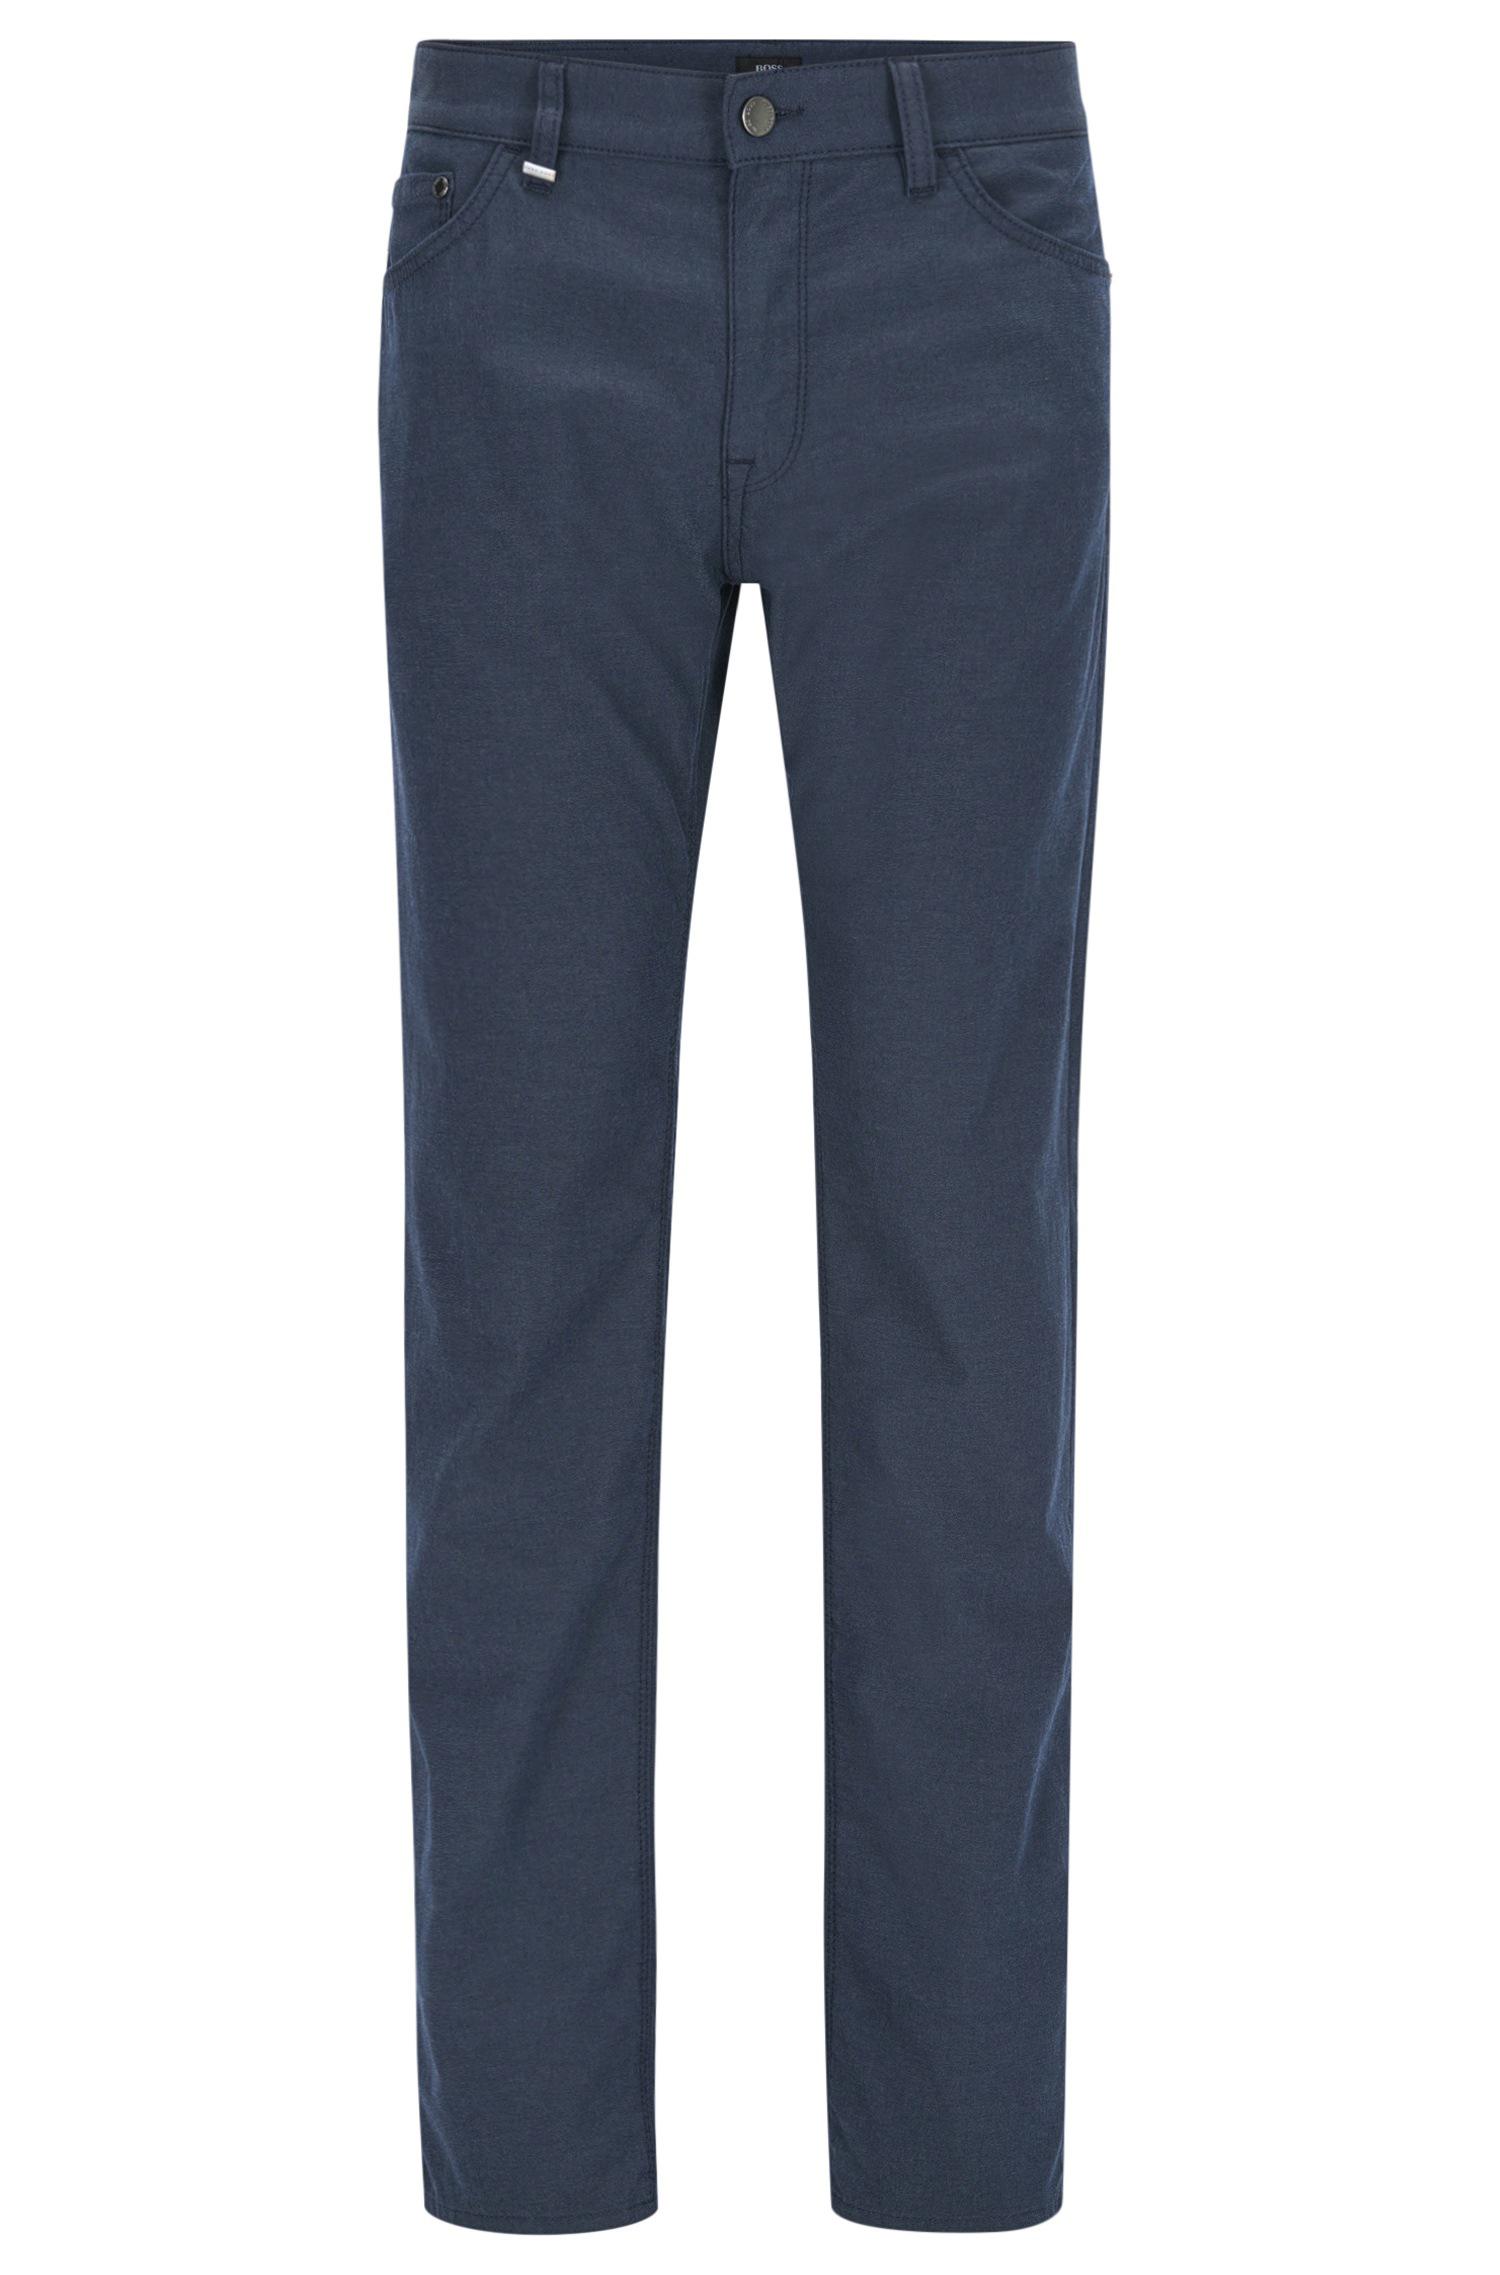 BOSS by Hugo Boss Stretch Cotton Pant, Regular Fit | Maine in Dark Blue  (Blue) for Men - Lyst